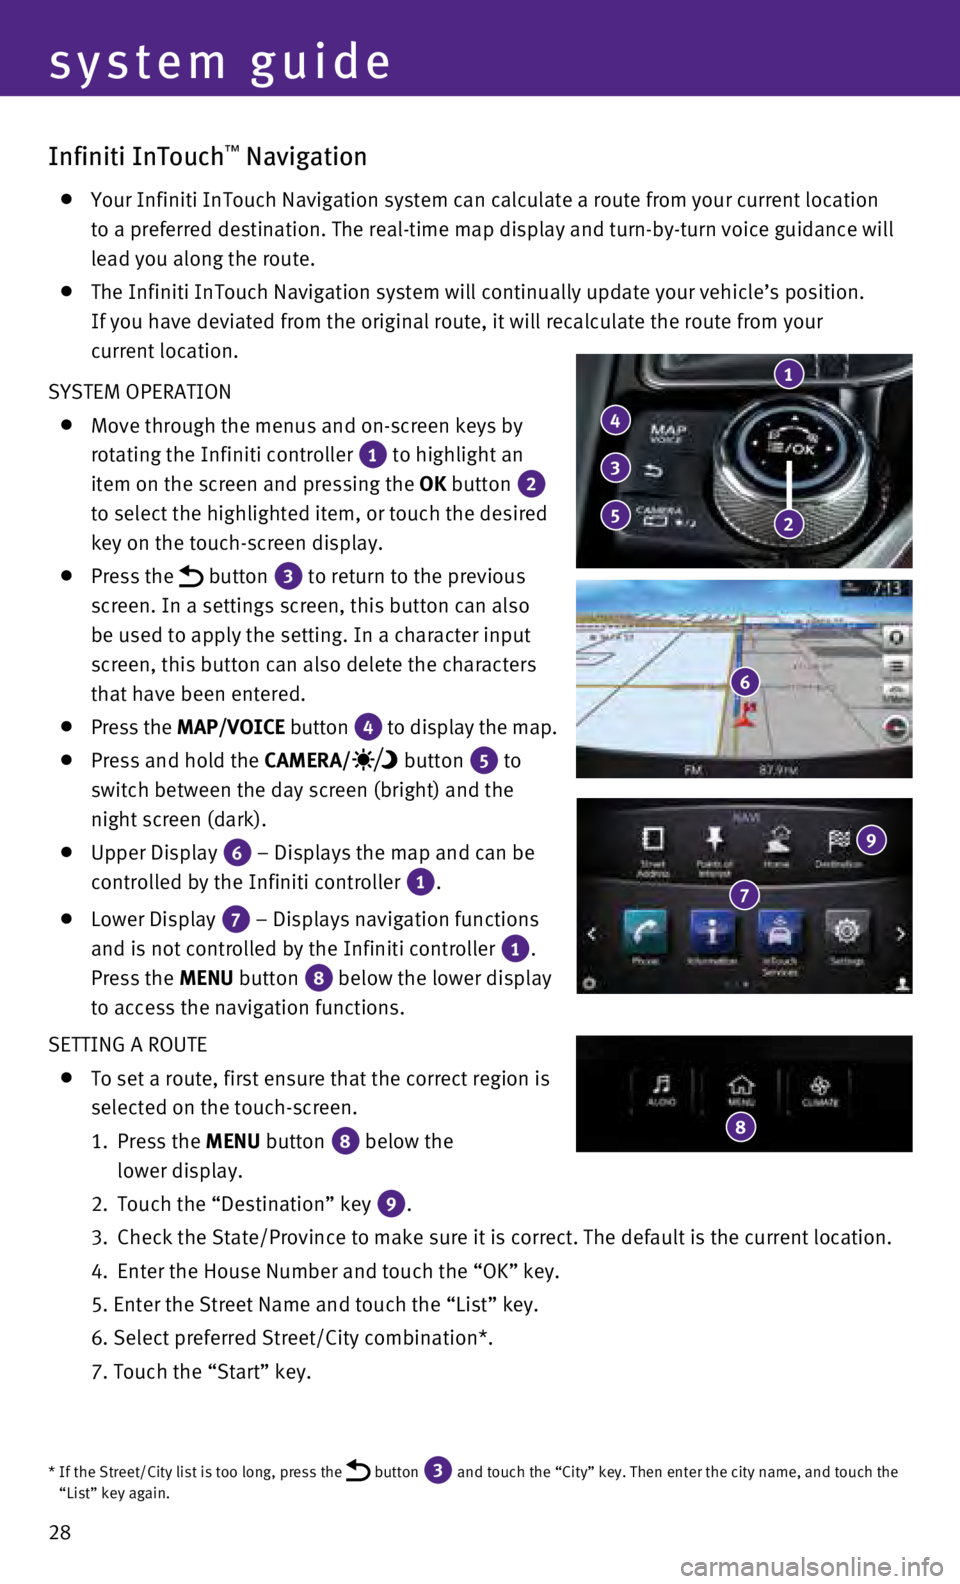 INFINITI Q50 HYBRID 2016  Quick Reference Guide 28
Infiniti InTouch™ Navigation
    Your Infiniti InTouch Navigation system can calculate a route from your \
current location 
to a preferred destination. The real-time map display and turn-by-turn